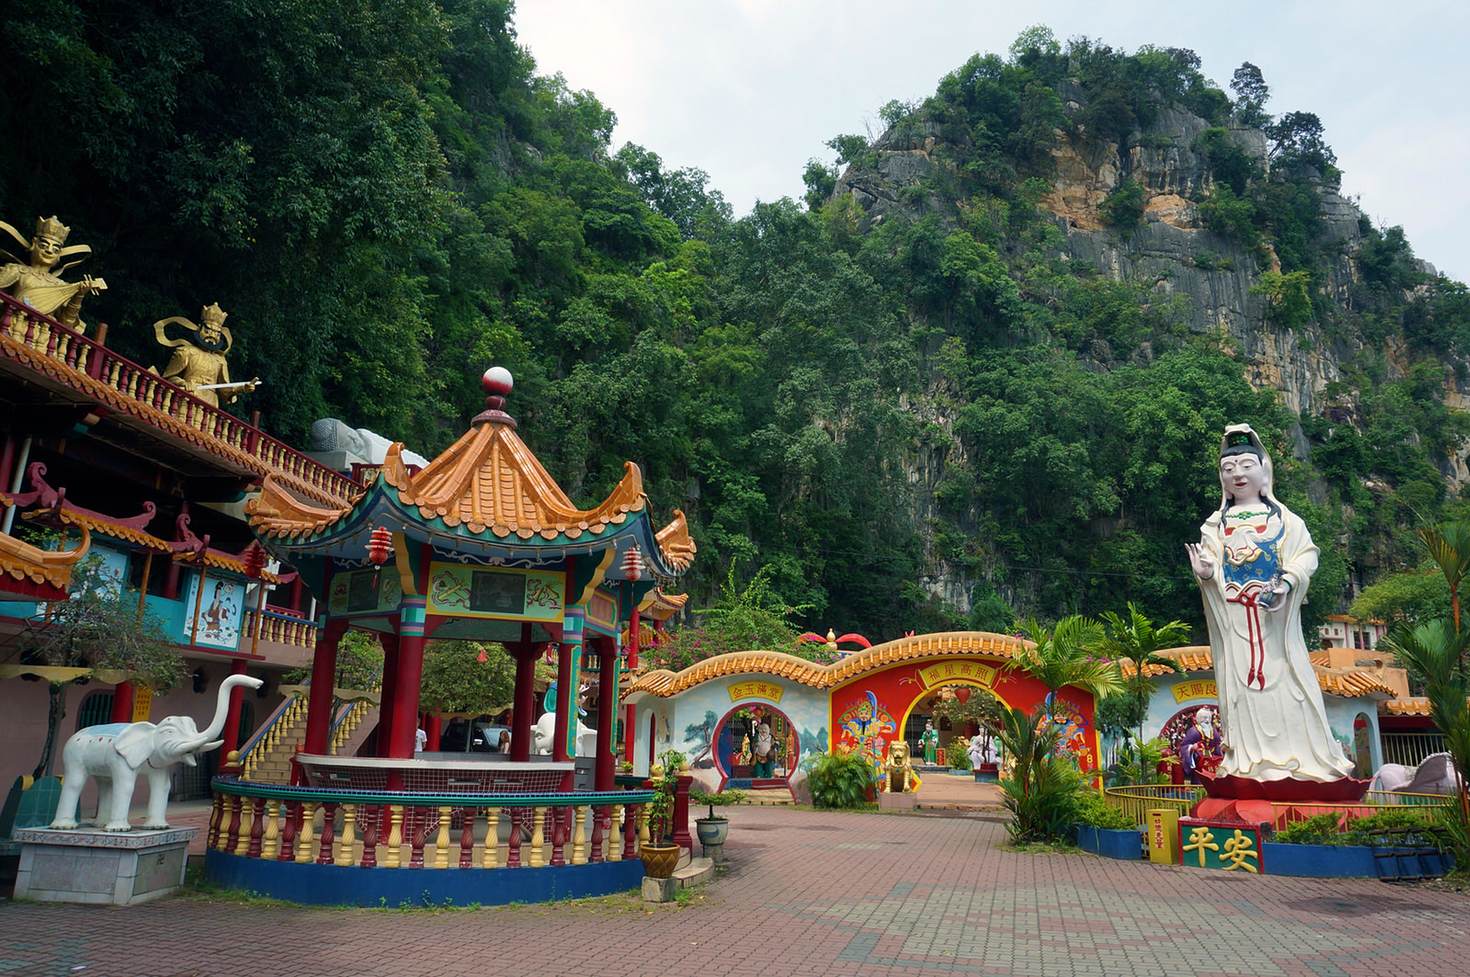  LonelyPlanet Ipoh  Ranked 6th Hottest Asian Destination 